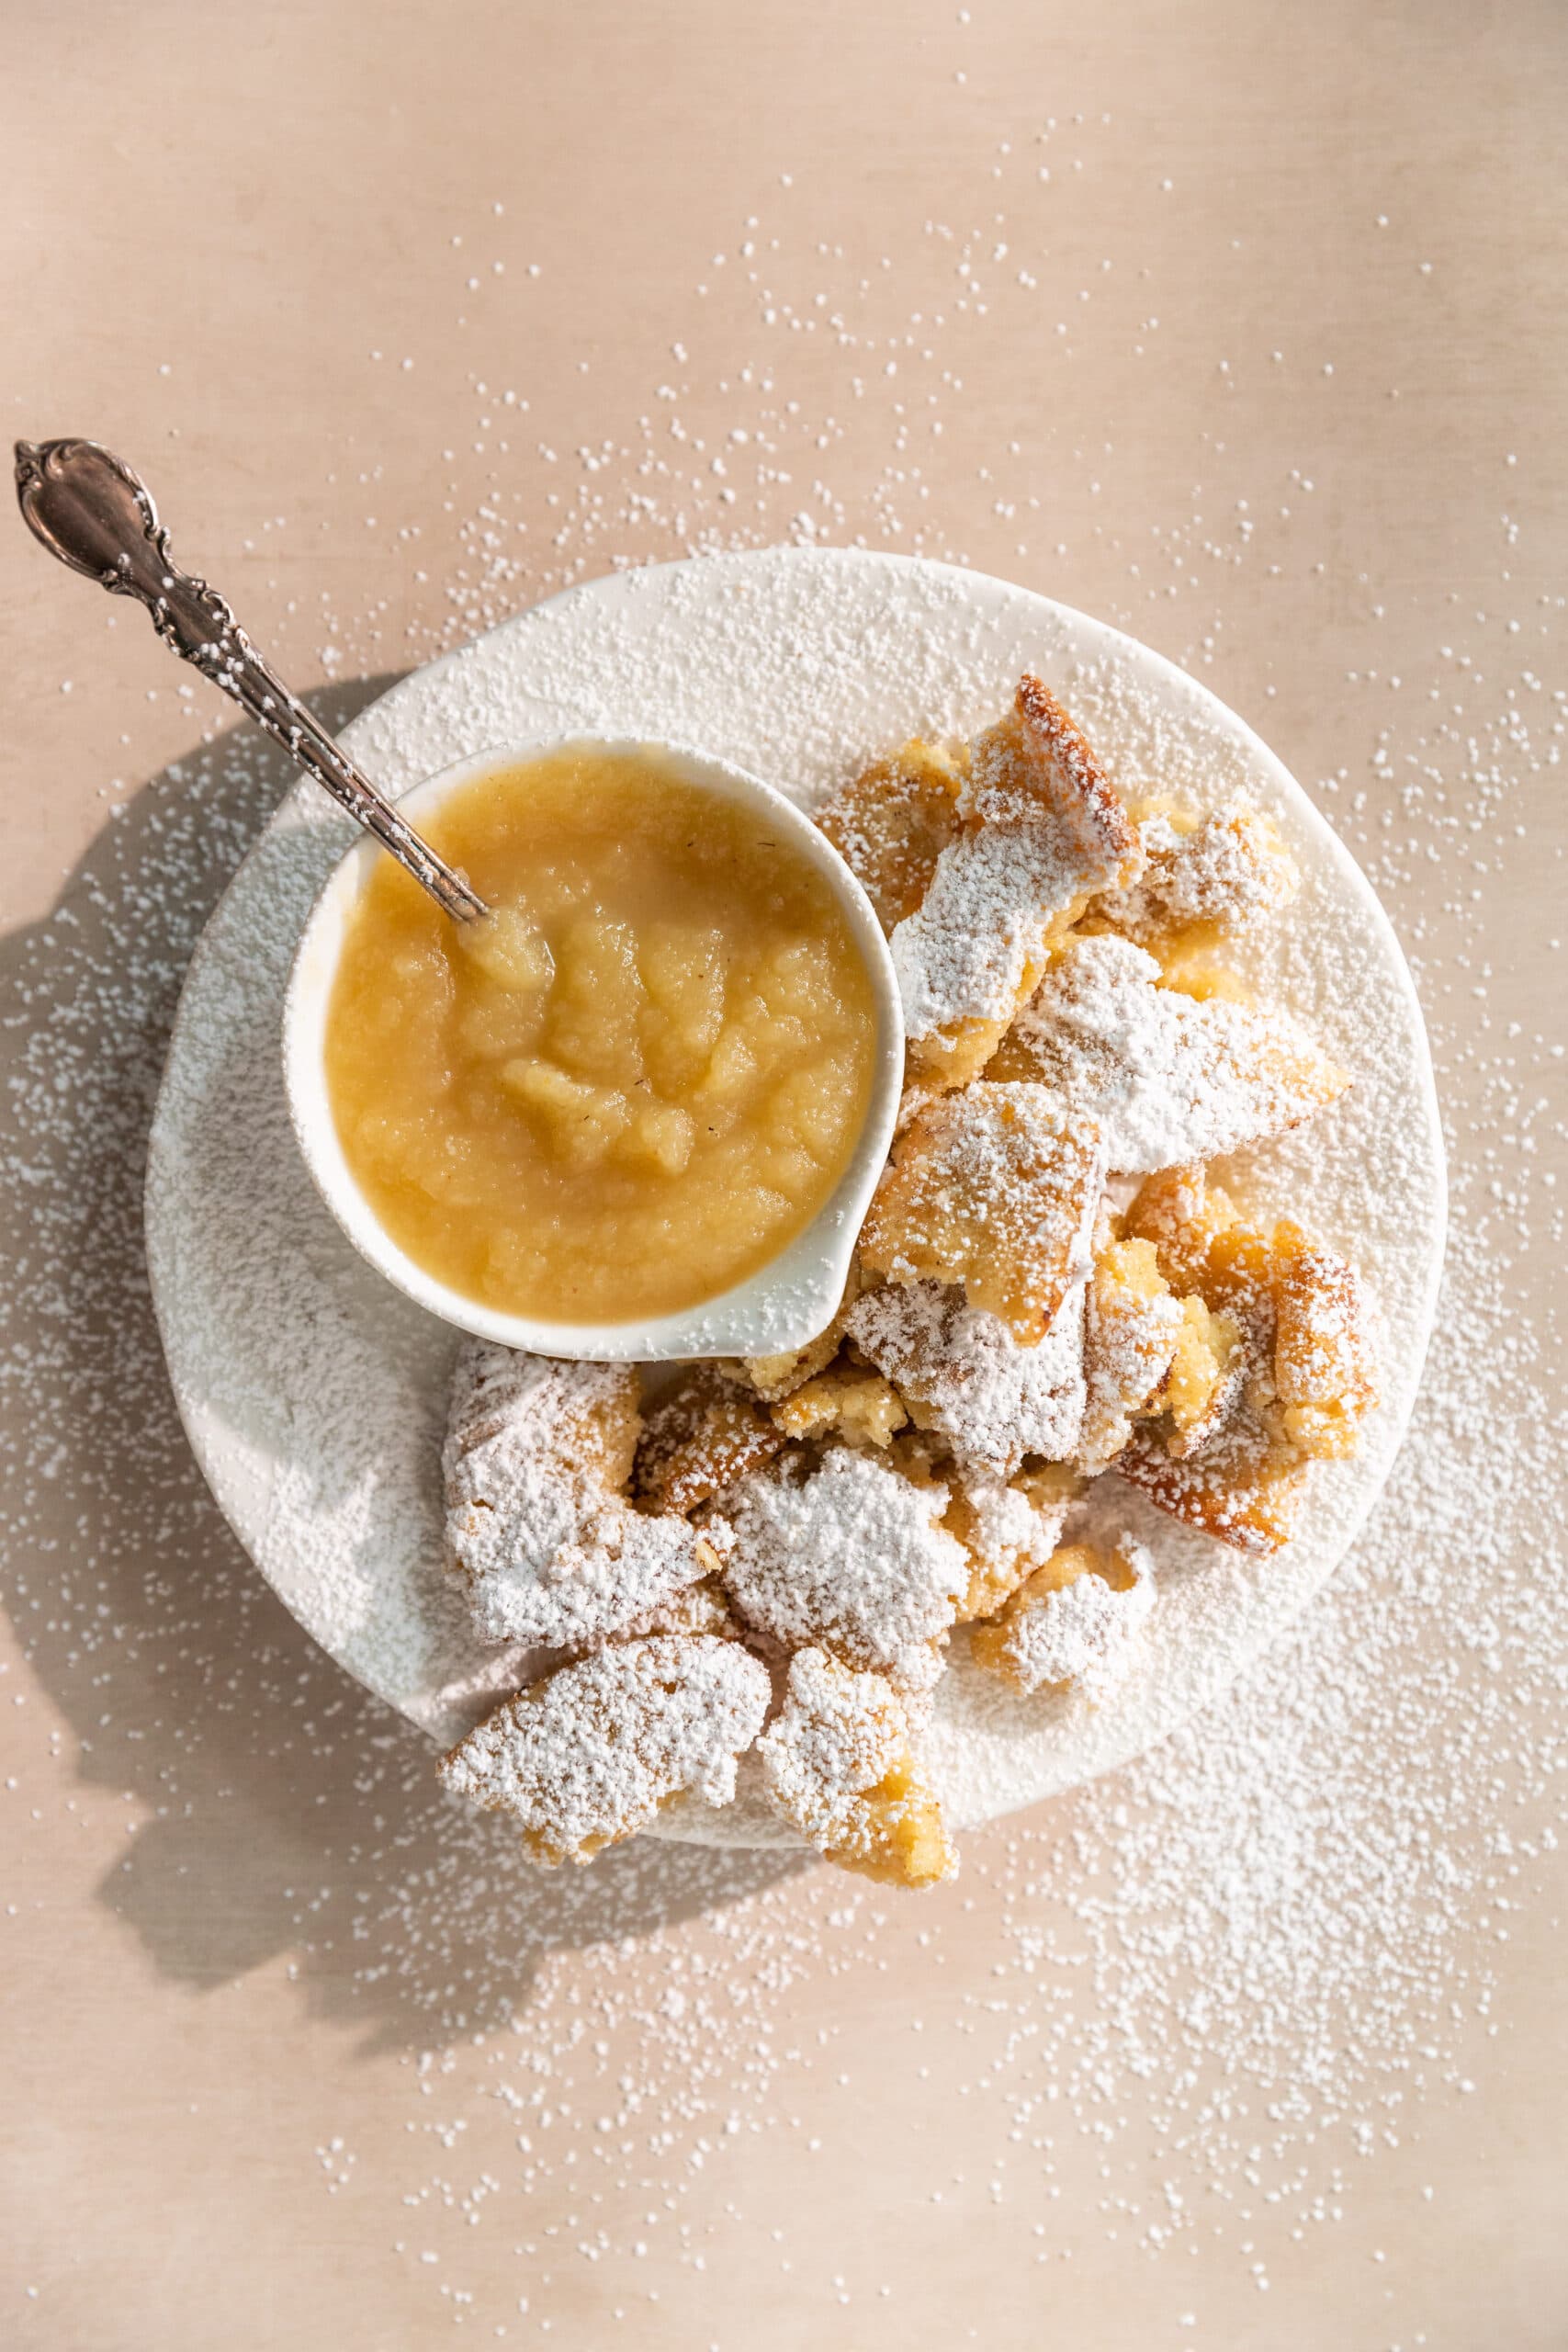 Overhead view of Kaiserschmarrn, an Austrian torn up pancake topped with powdered sugar and served with applesauce.